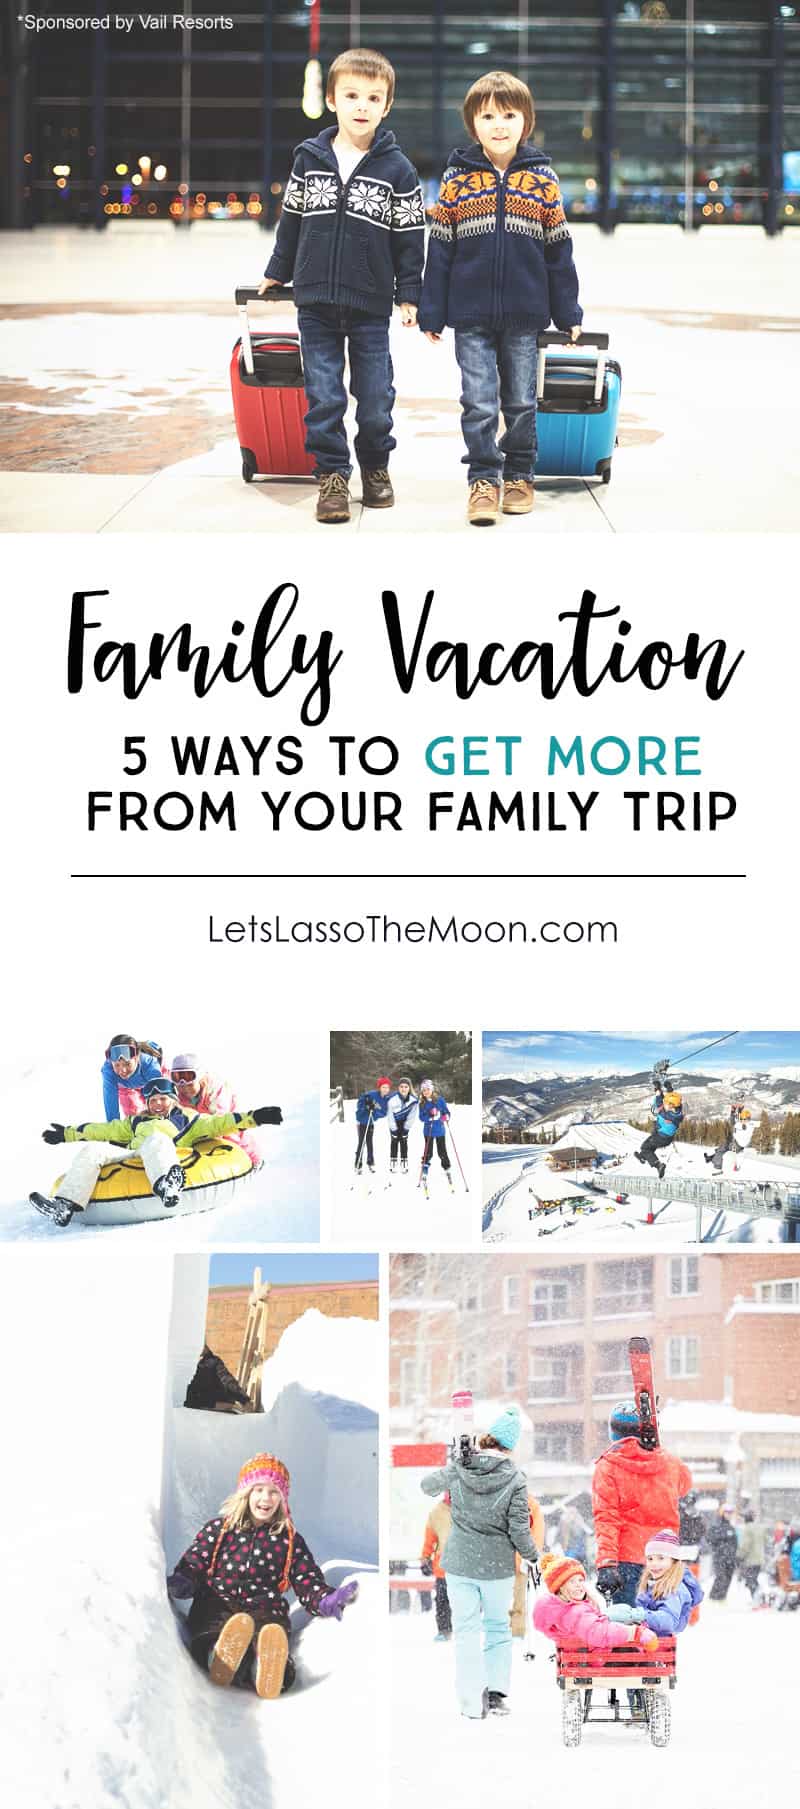 5 Ways to Get More Out of Your Family Vacation *loving this parent tips. saving this for planning our next trip.